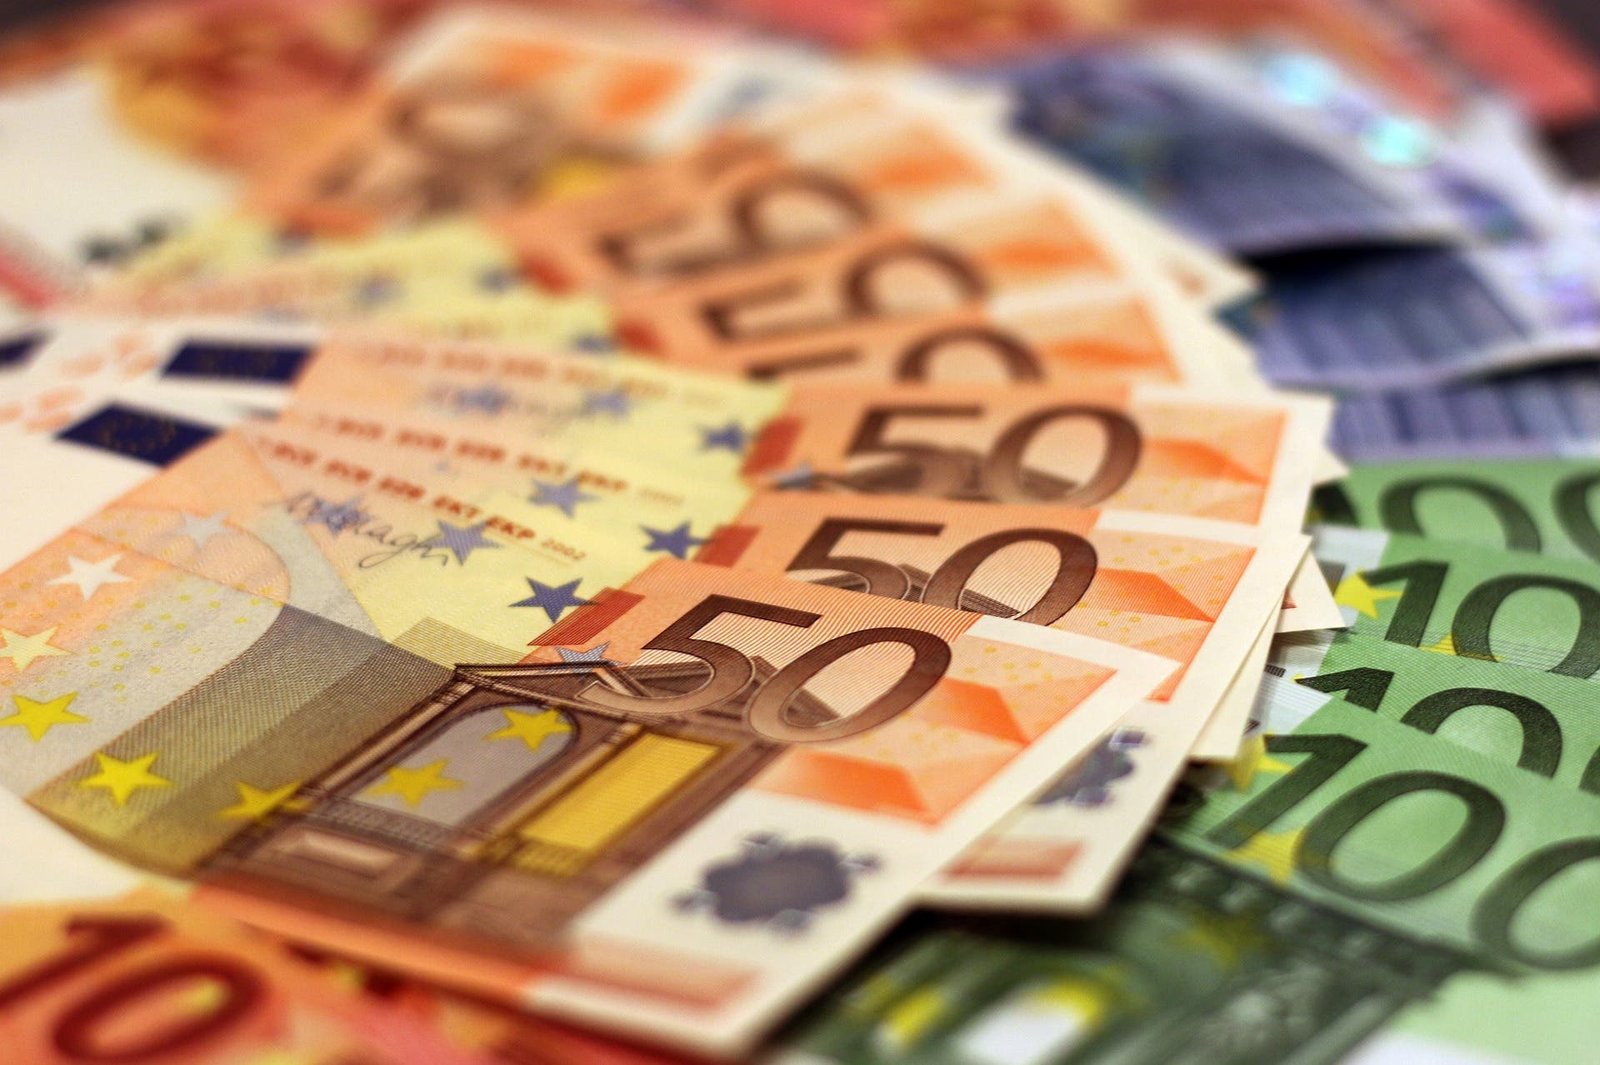 Cash Shower on Spain's A7! Marbella Motorway Awash with €20,000 in €50 Notes! - money g0b909d9c9 1920 - Marbella News Crime -